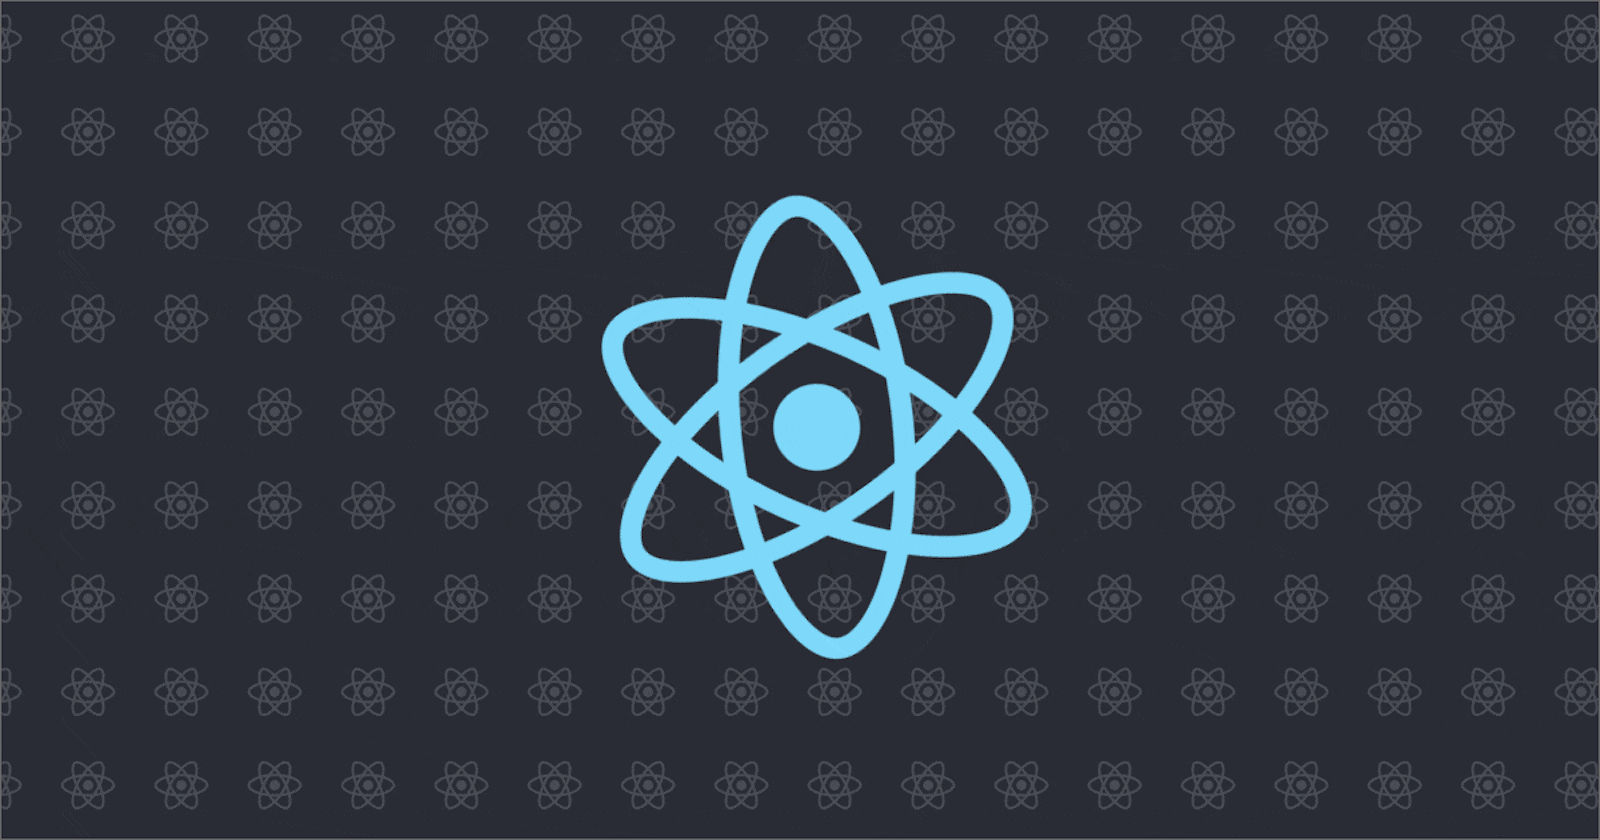 React and state hook